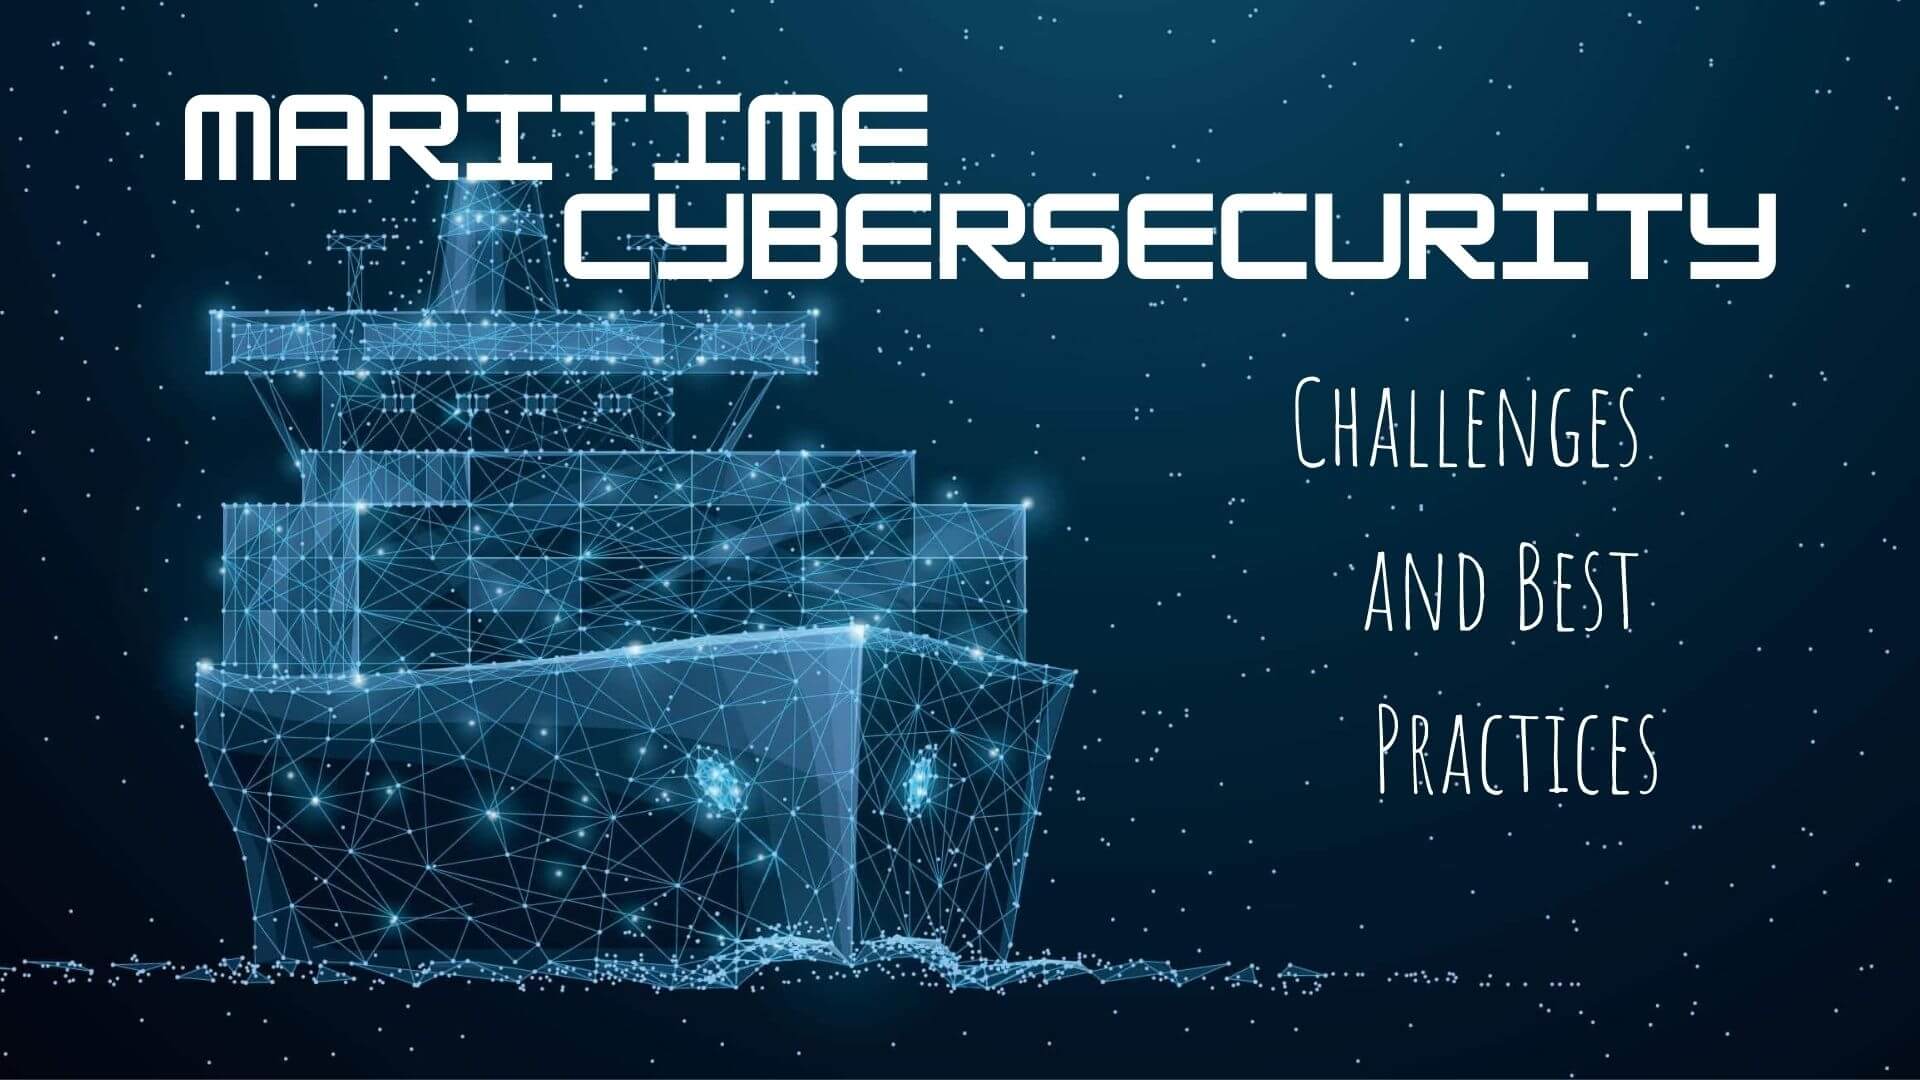 Challenges and Best Practices to Mitigate Risks in Maritime Cyber security - MaritimeCyprus